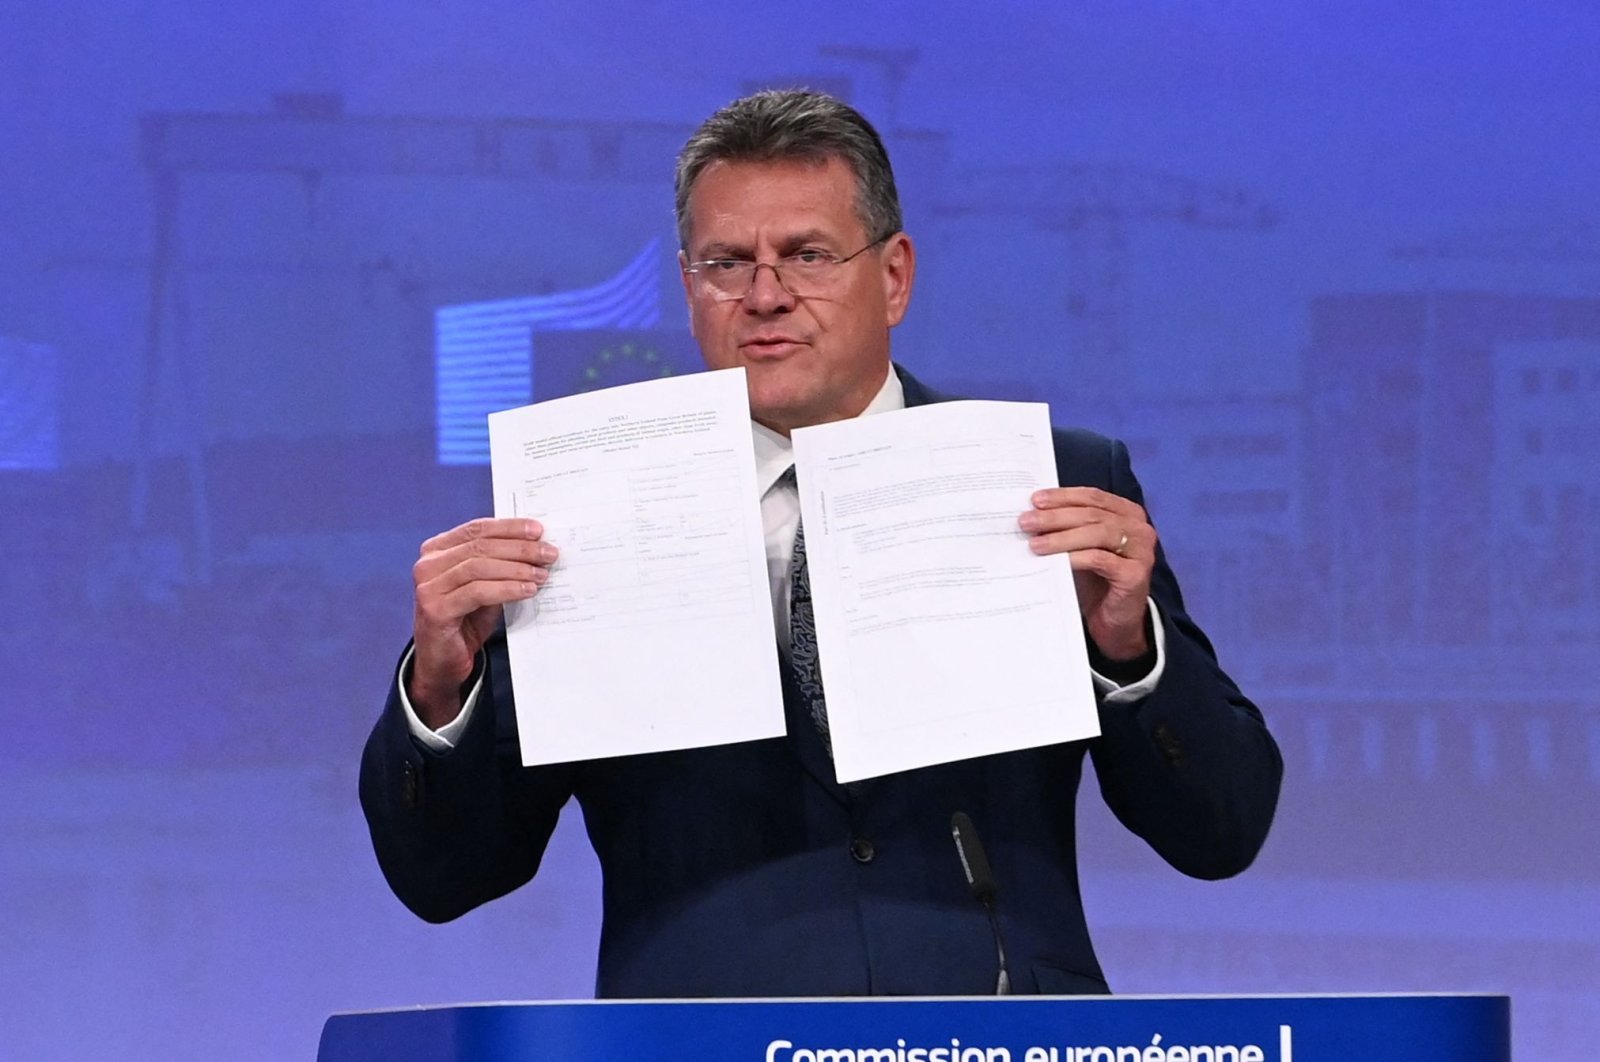 European Commission Vice President Maros Sefcovic gives a press conference at the EU headquarters in Brussels, Belgium, June 15, 2022. (AFP Photo)